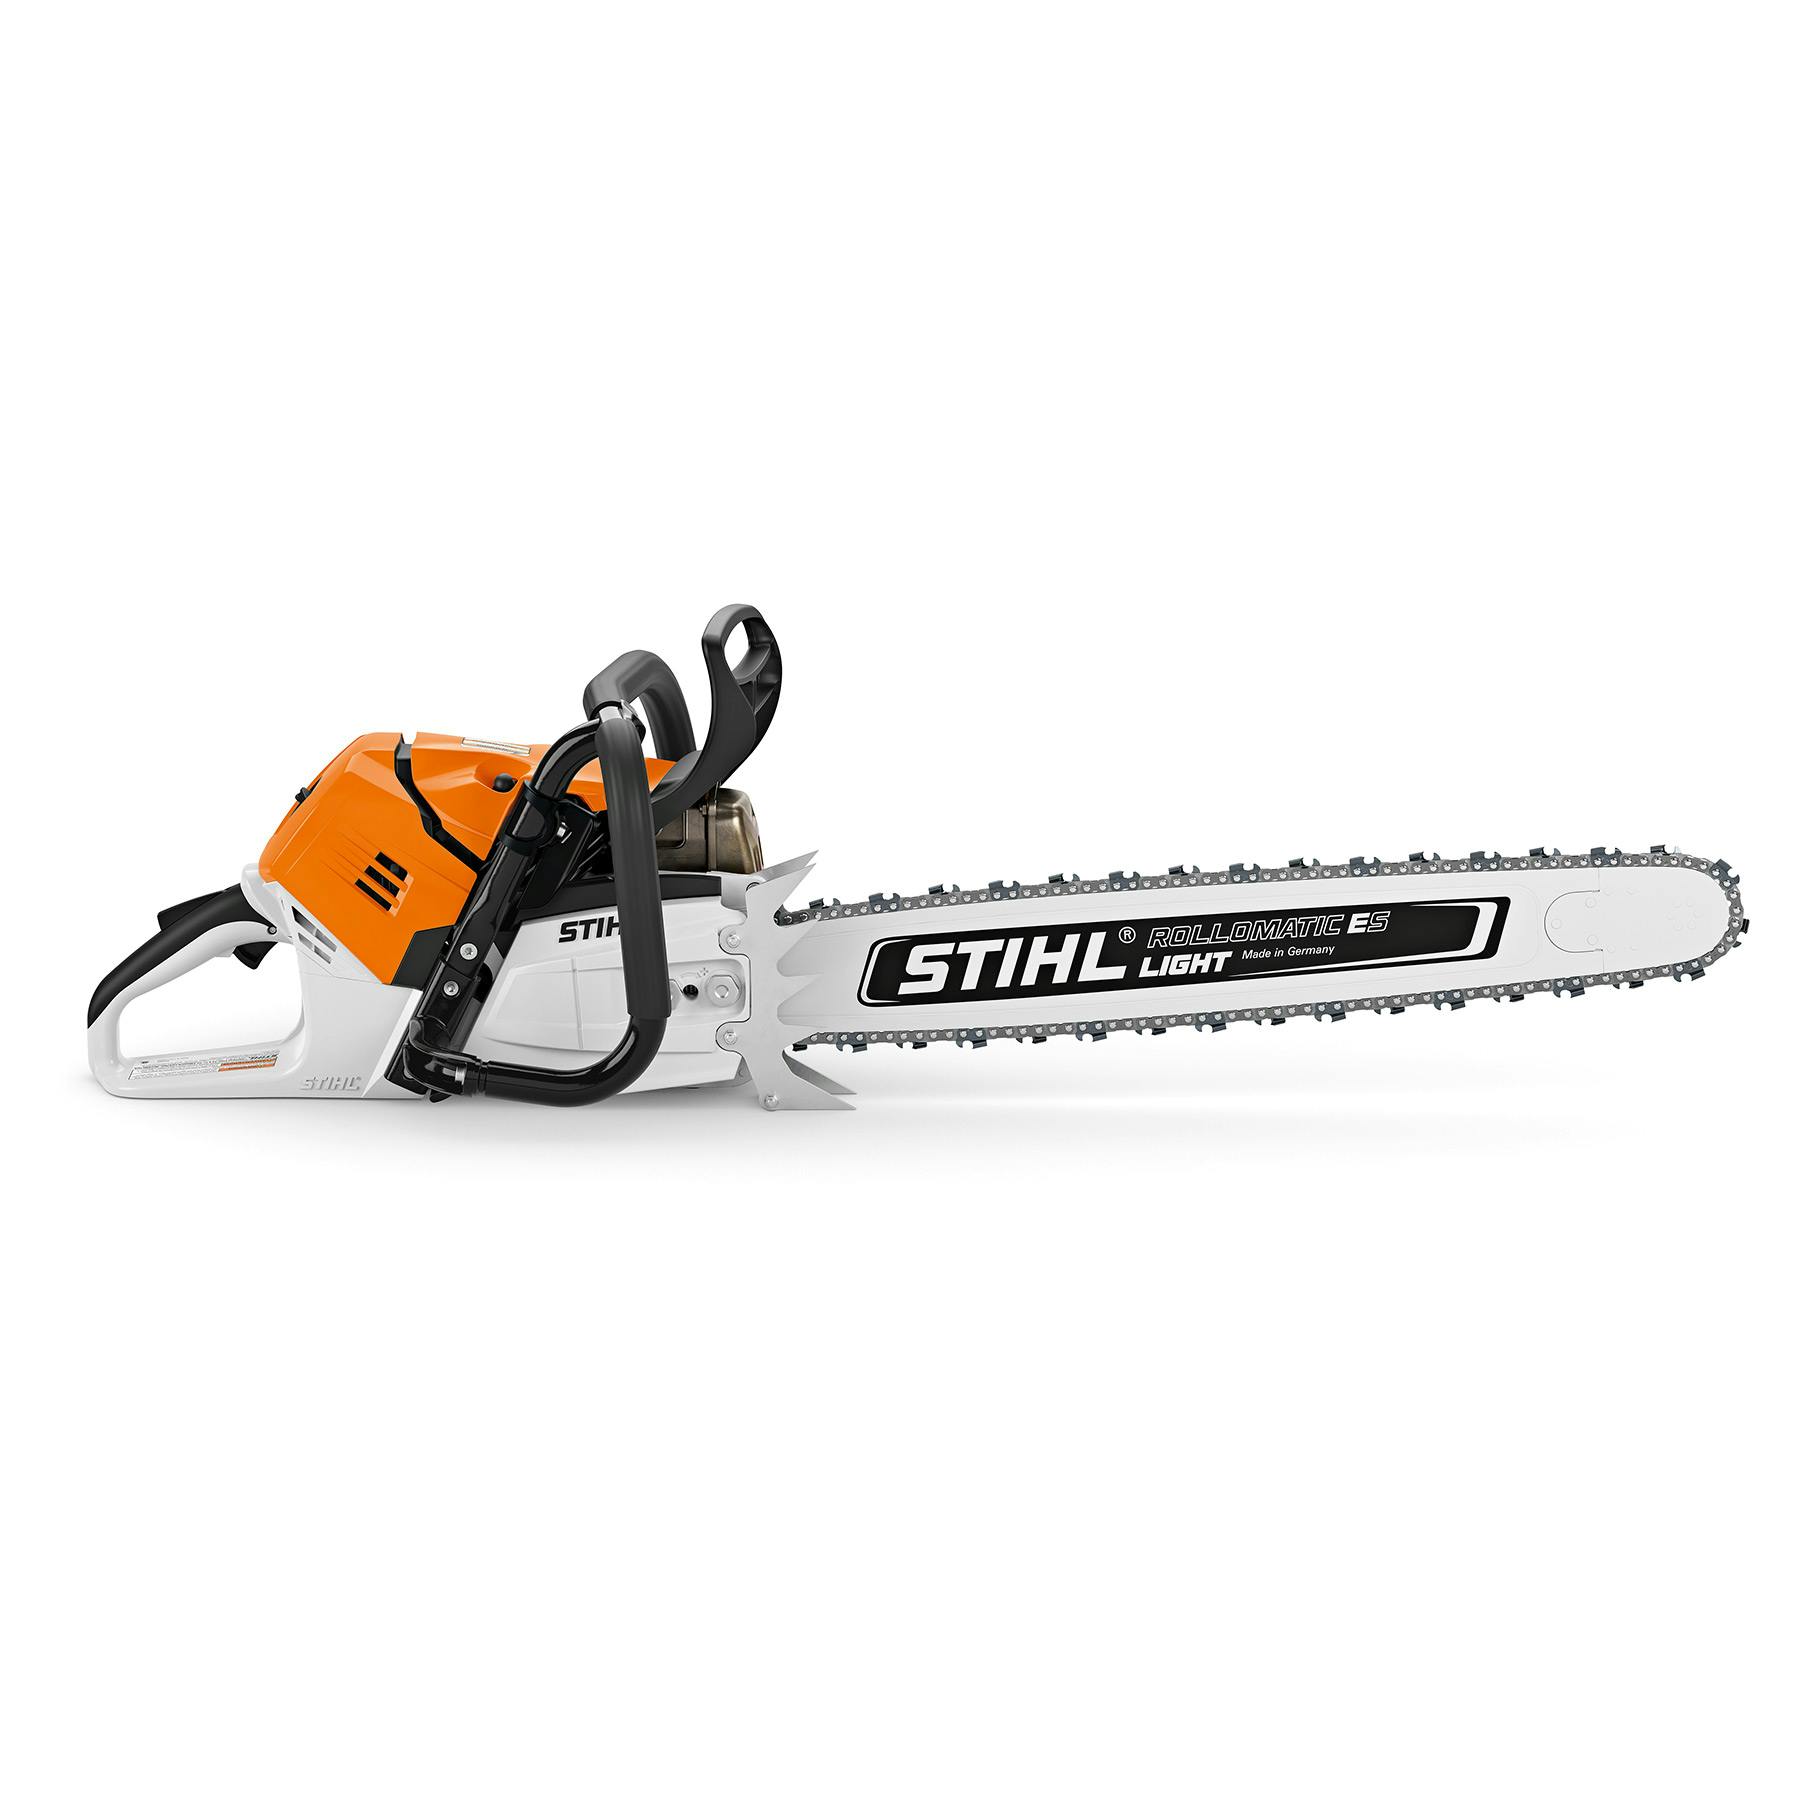 STIHL MS 361 Chainsaw Review – A Reliable and Versatile Performer